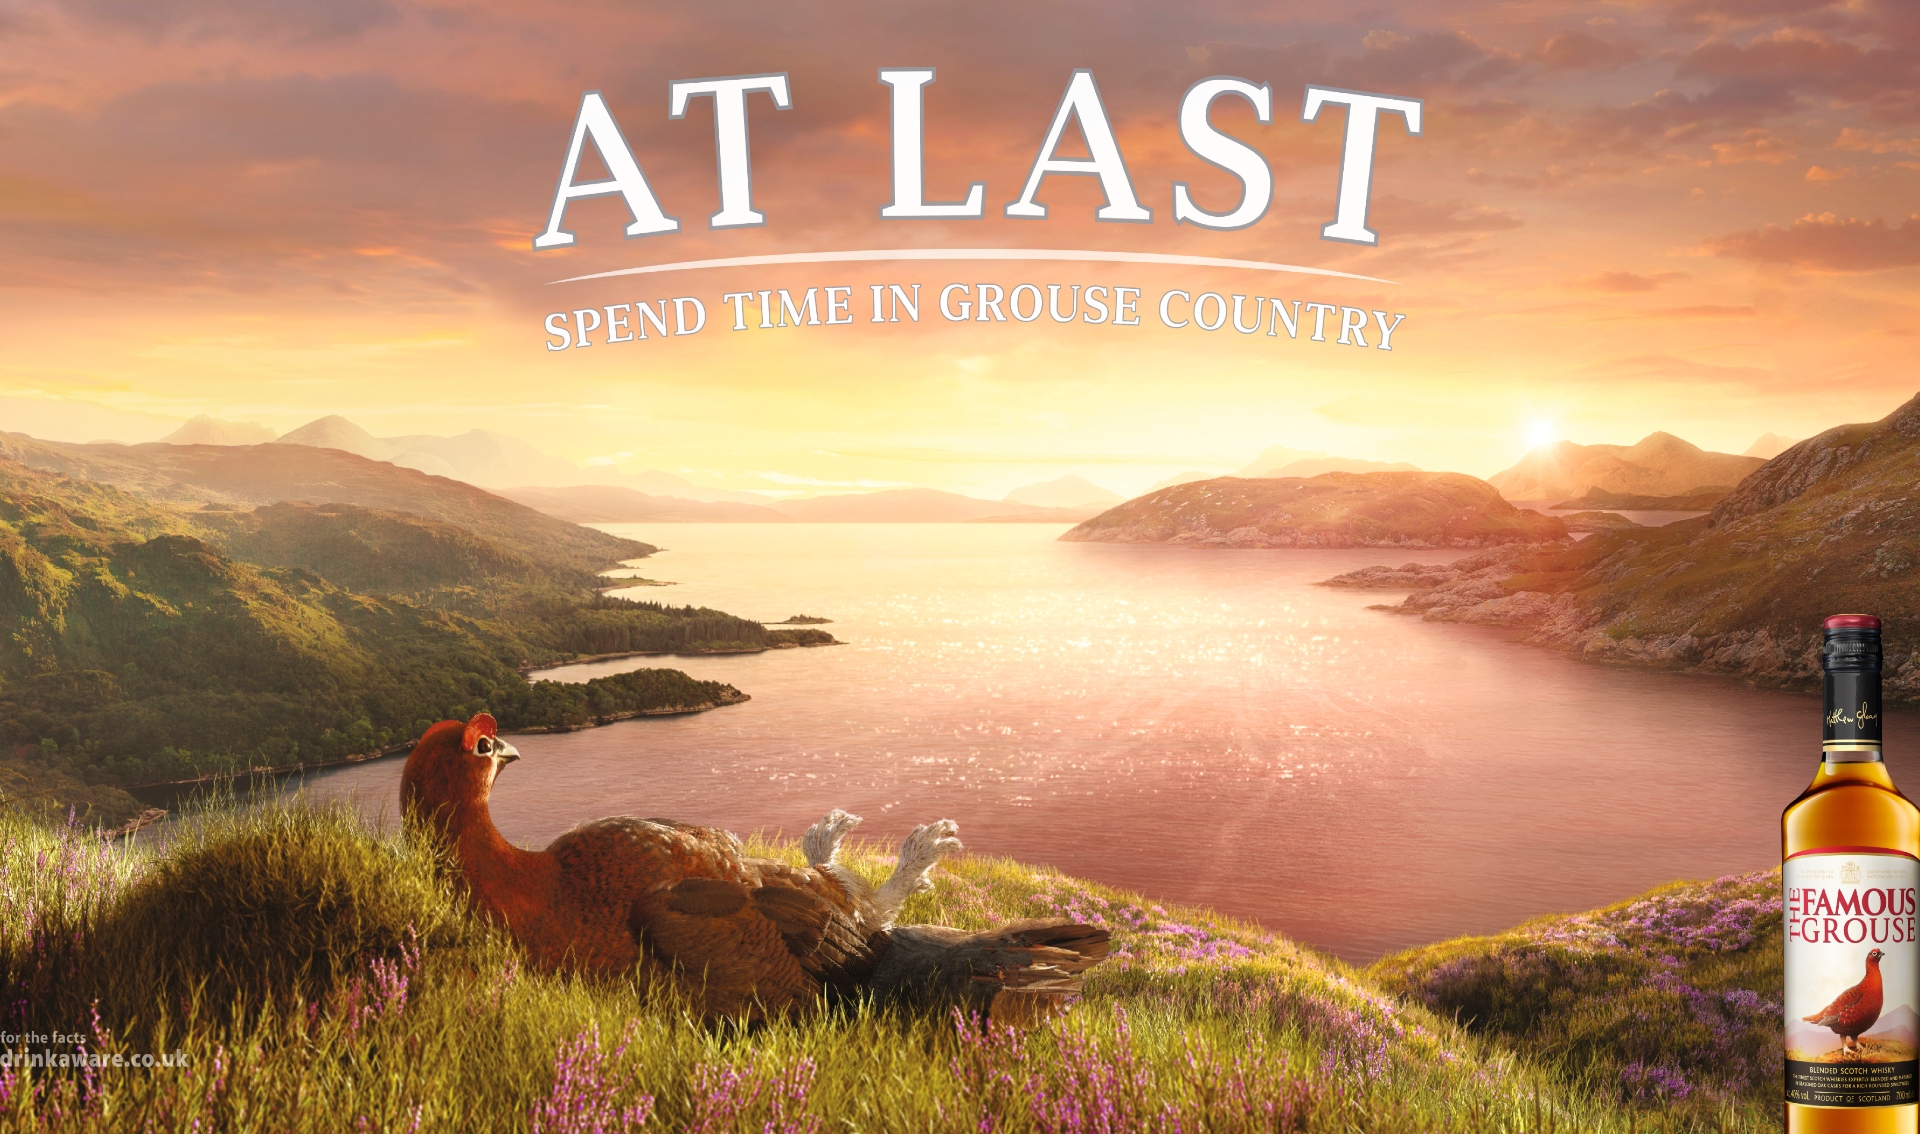 The Famous Grouse's global campaign invites consumers to explore its range and spend time in Grouse country 